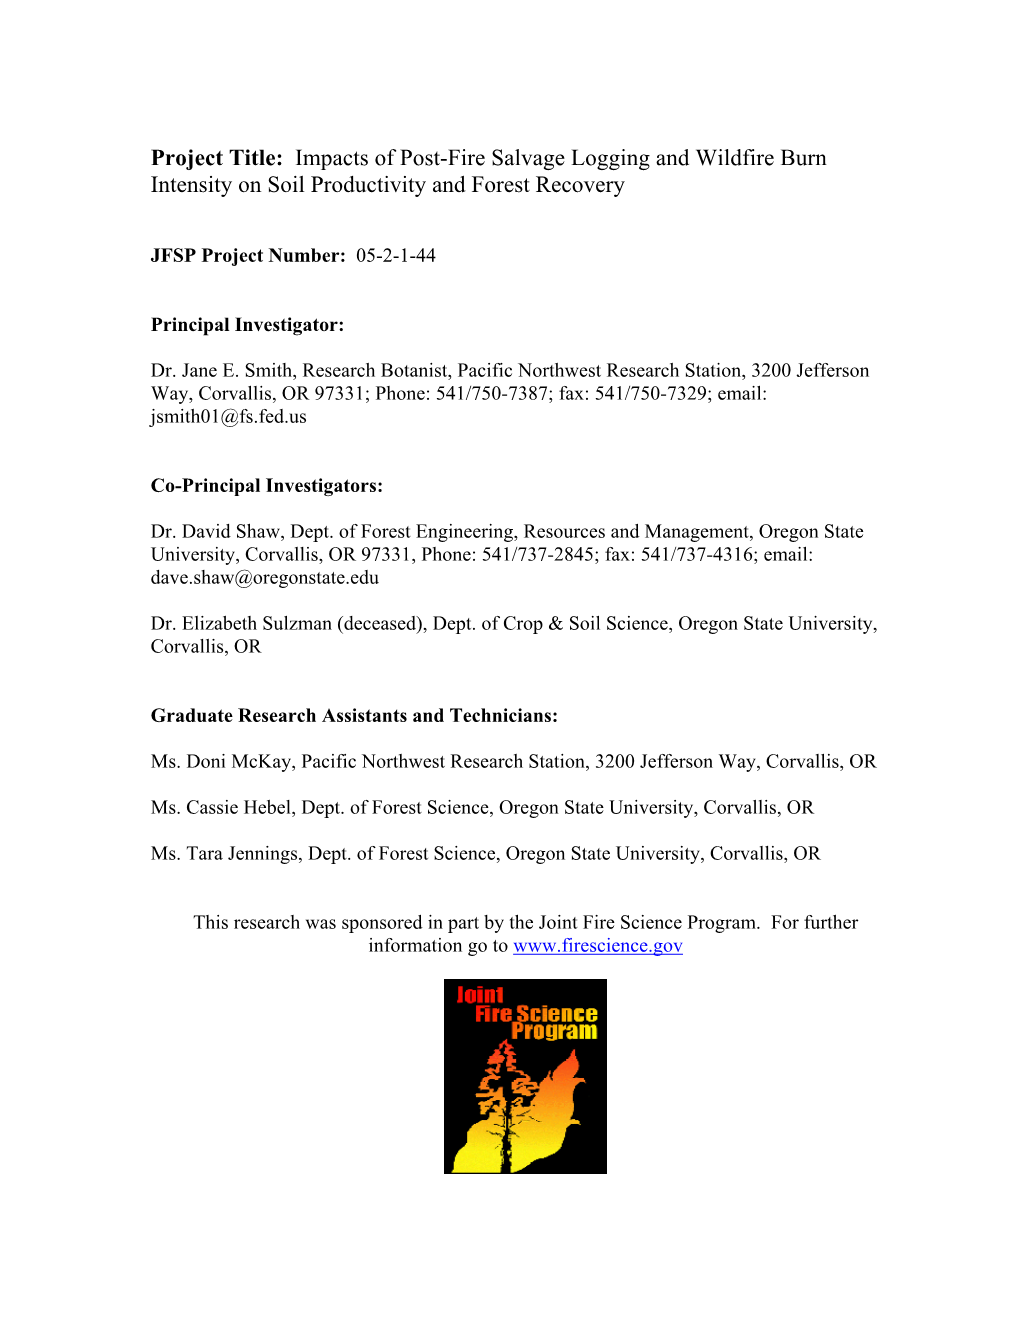 Project Title: Impacts of Post-Fire Salvage Logging and Wildfire Burn Intensity on Soil Productivity and Forest Recovery